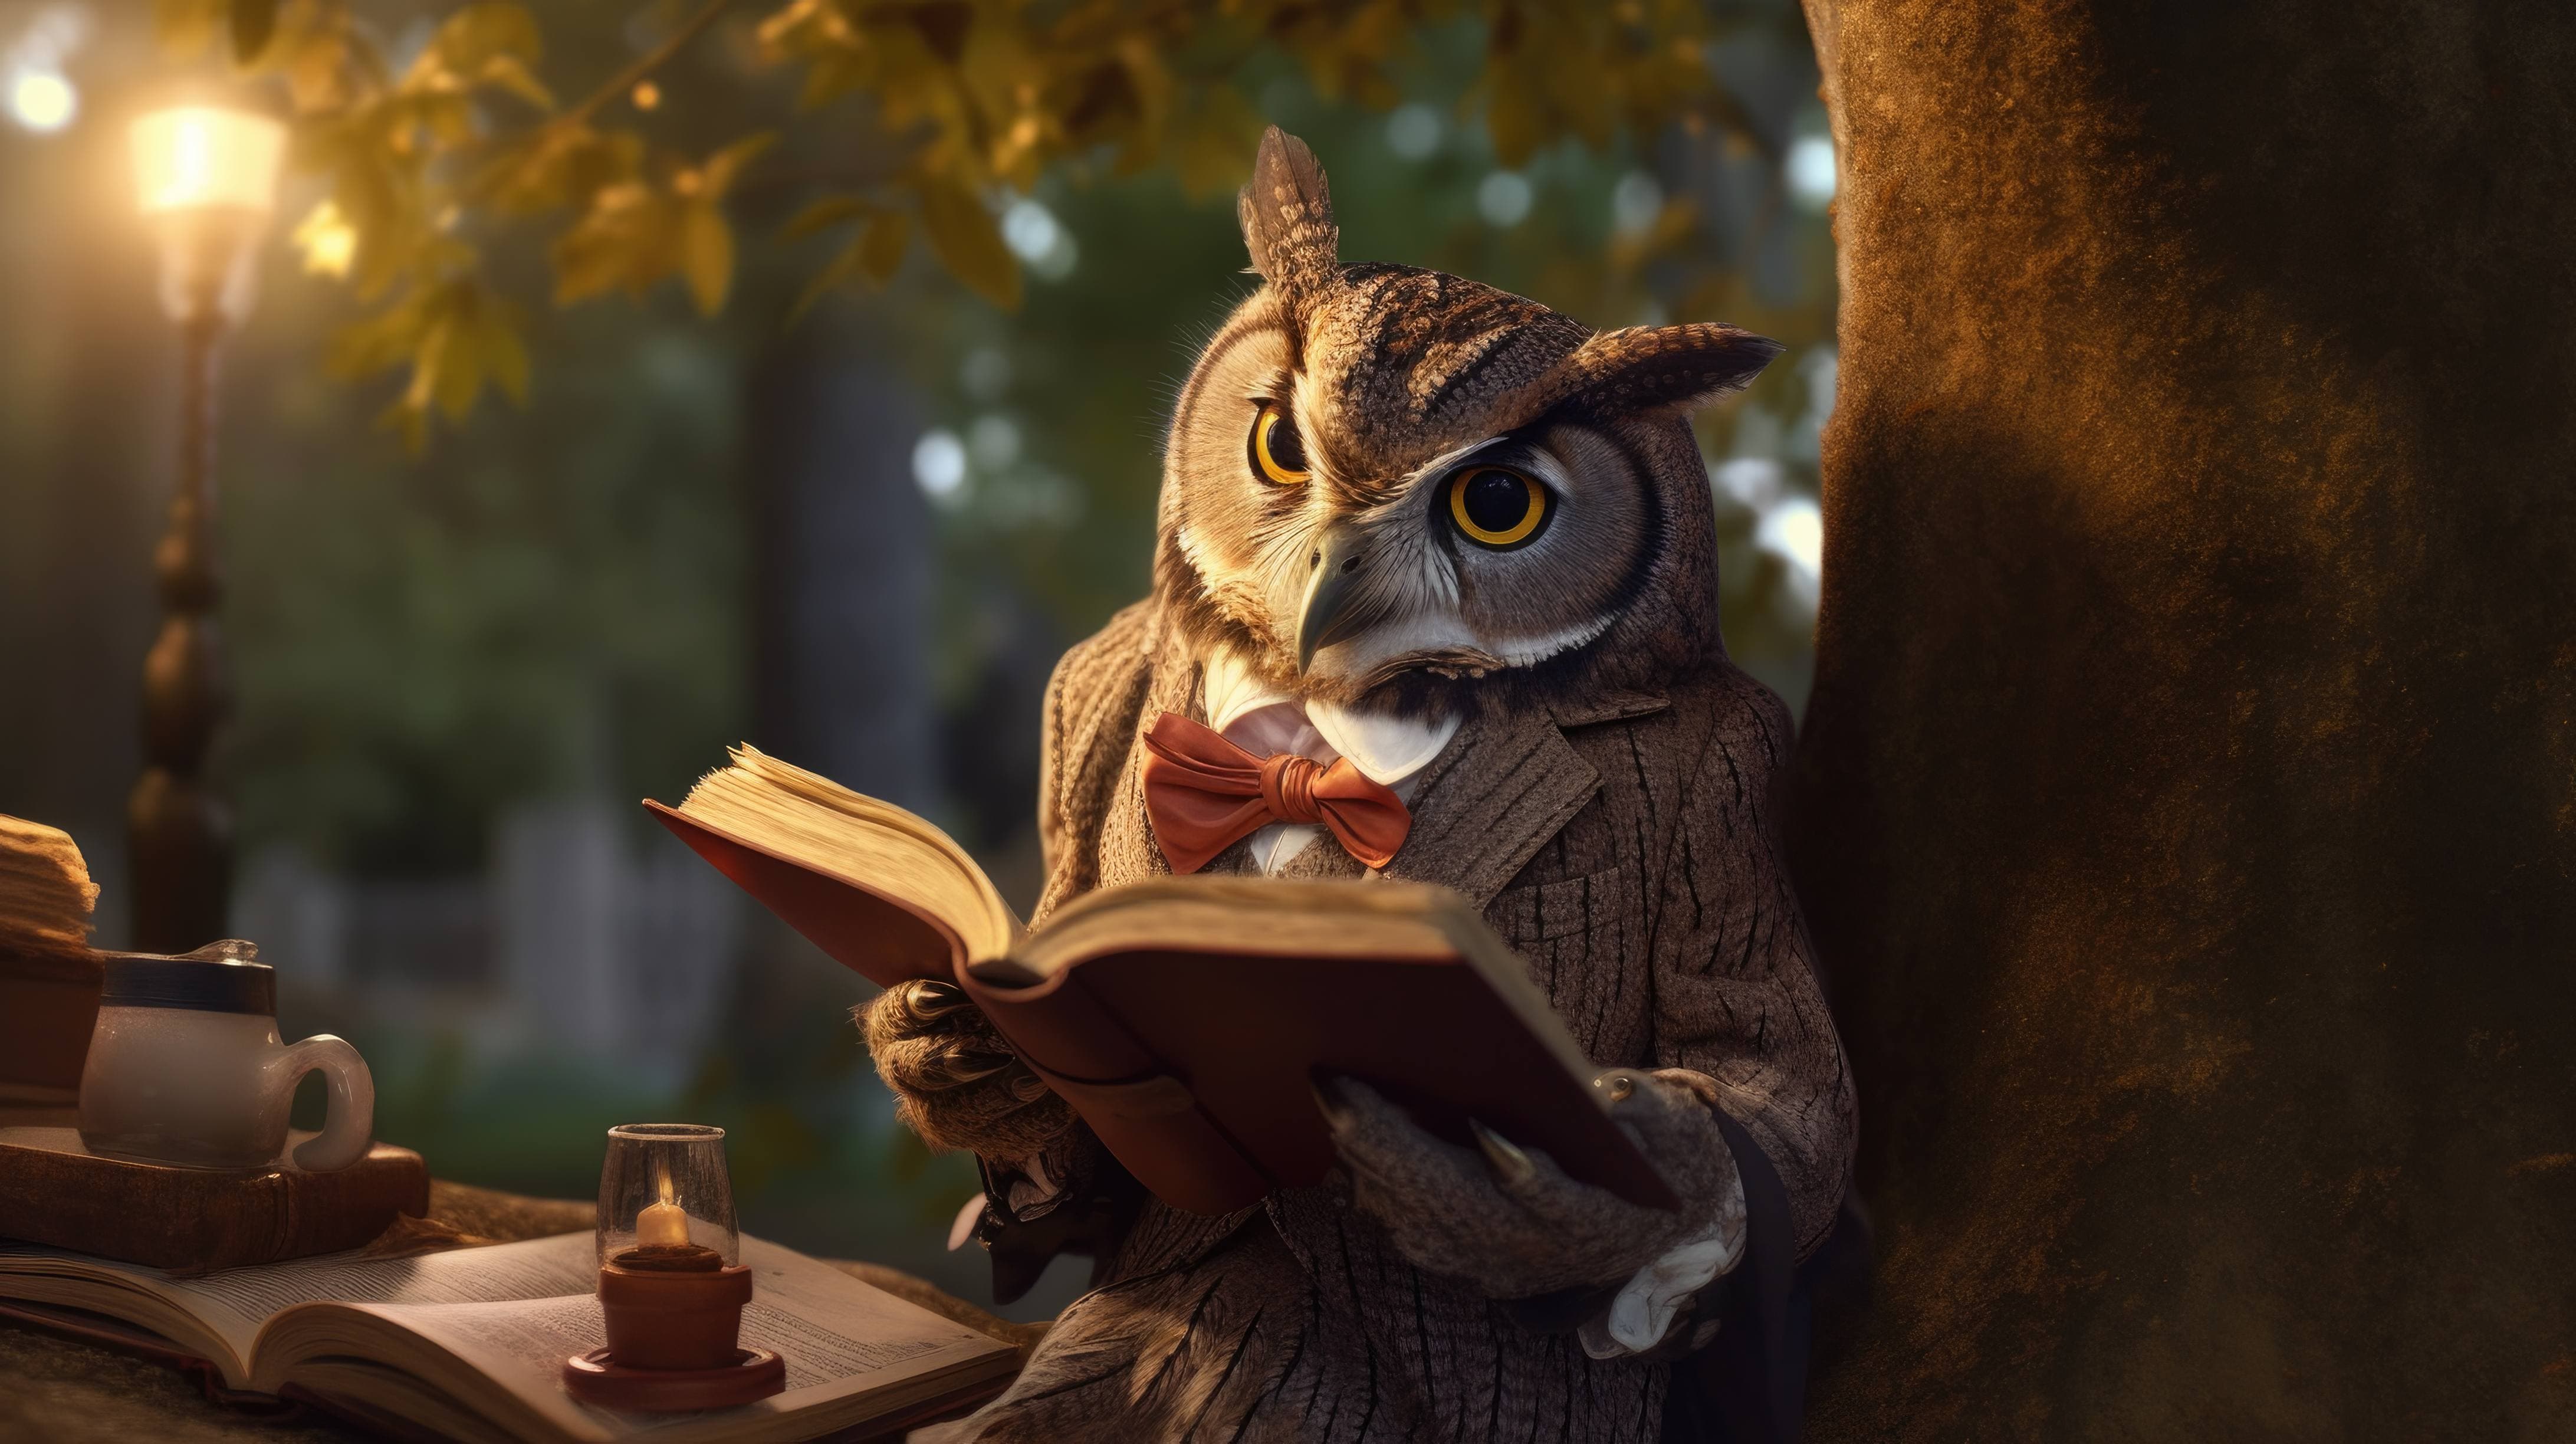 A 4K ultra HD wallpaper of a sophisticated owl wearing a bowtie and reading a book while perched on a tree branch in a park filled with animals dressed in stylish clothing